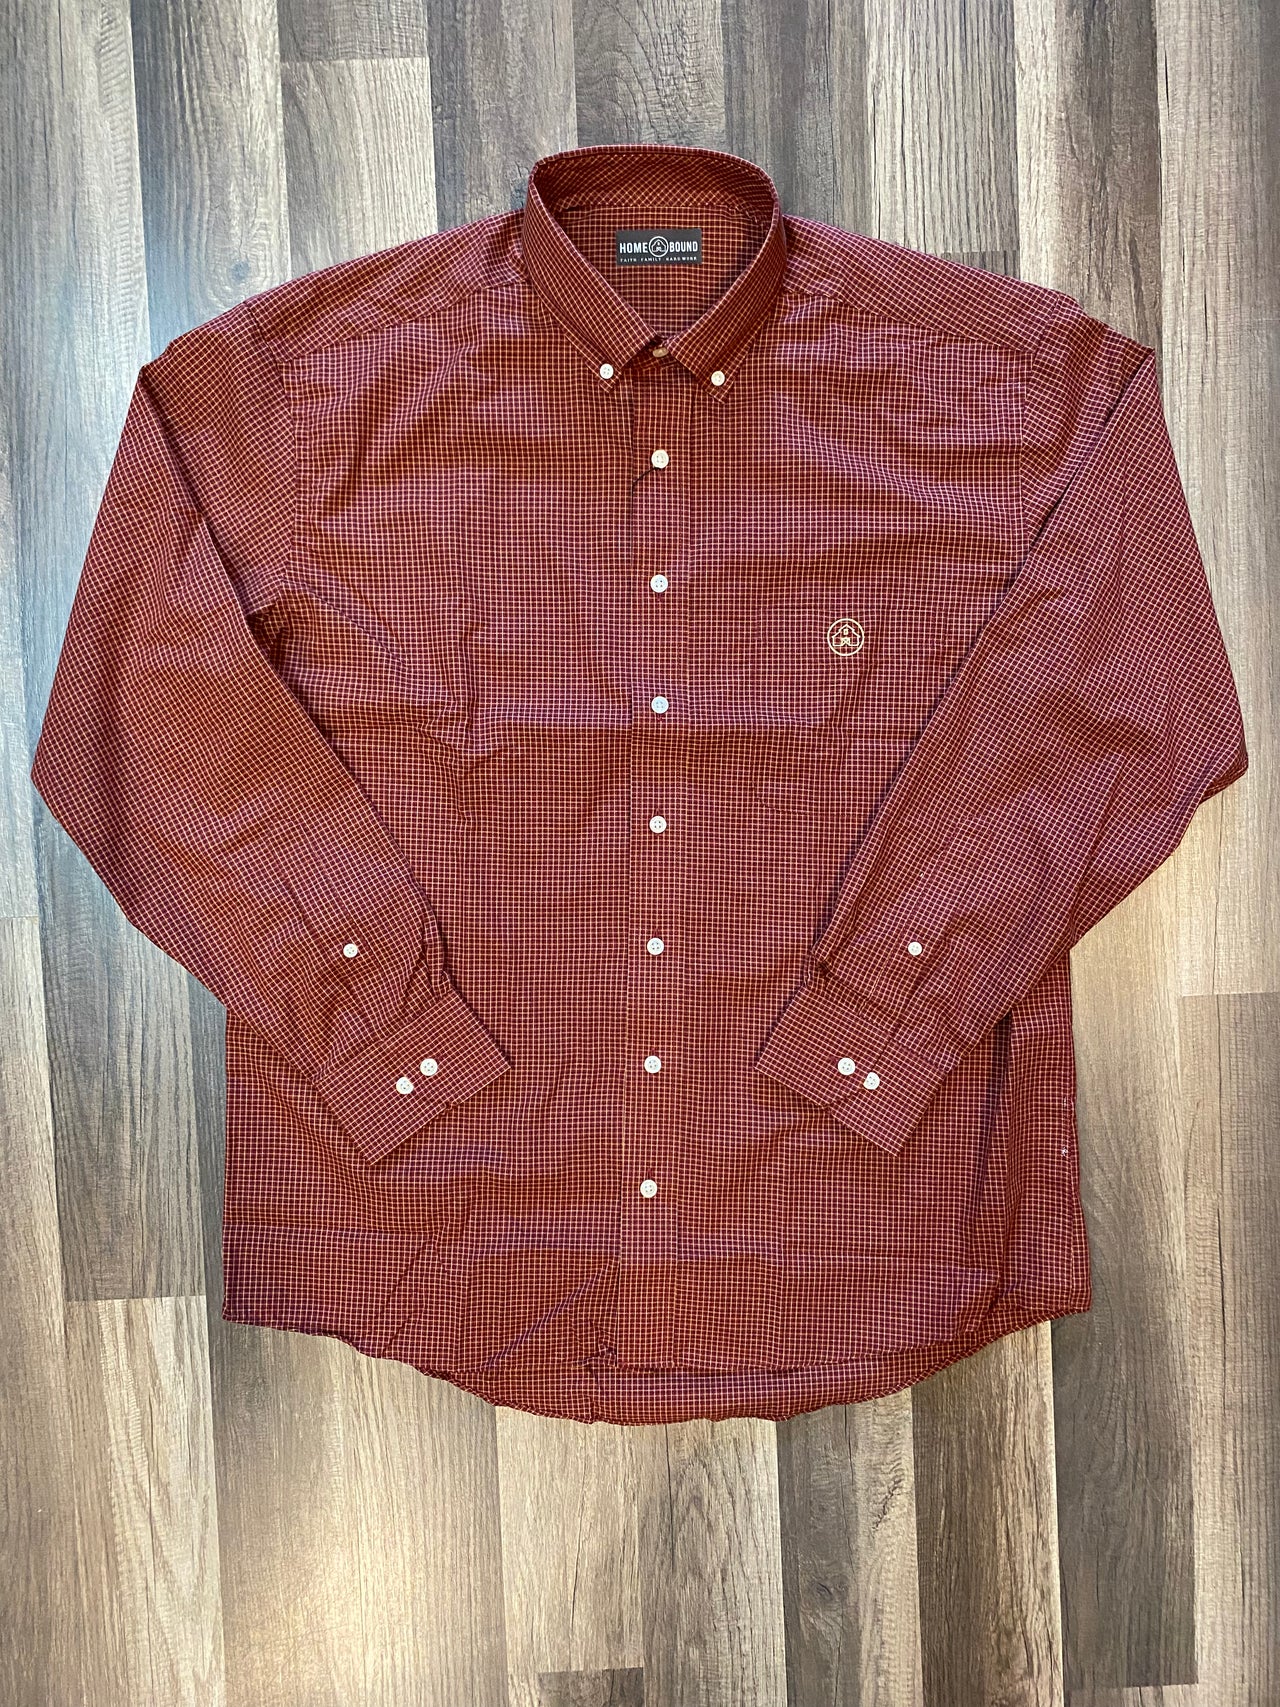 Rust & Gold Check Button Down